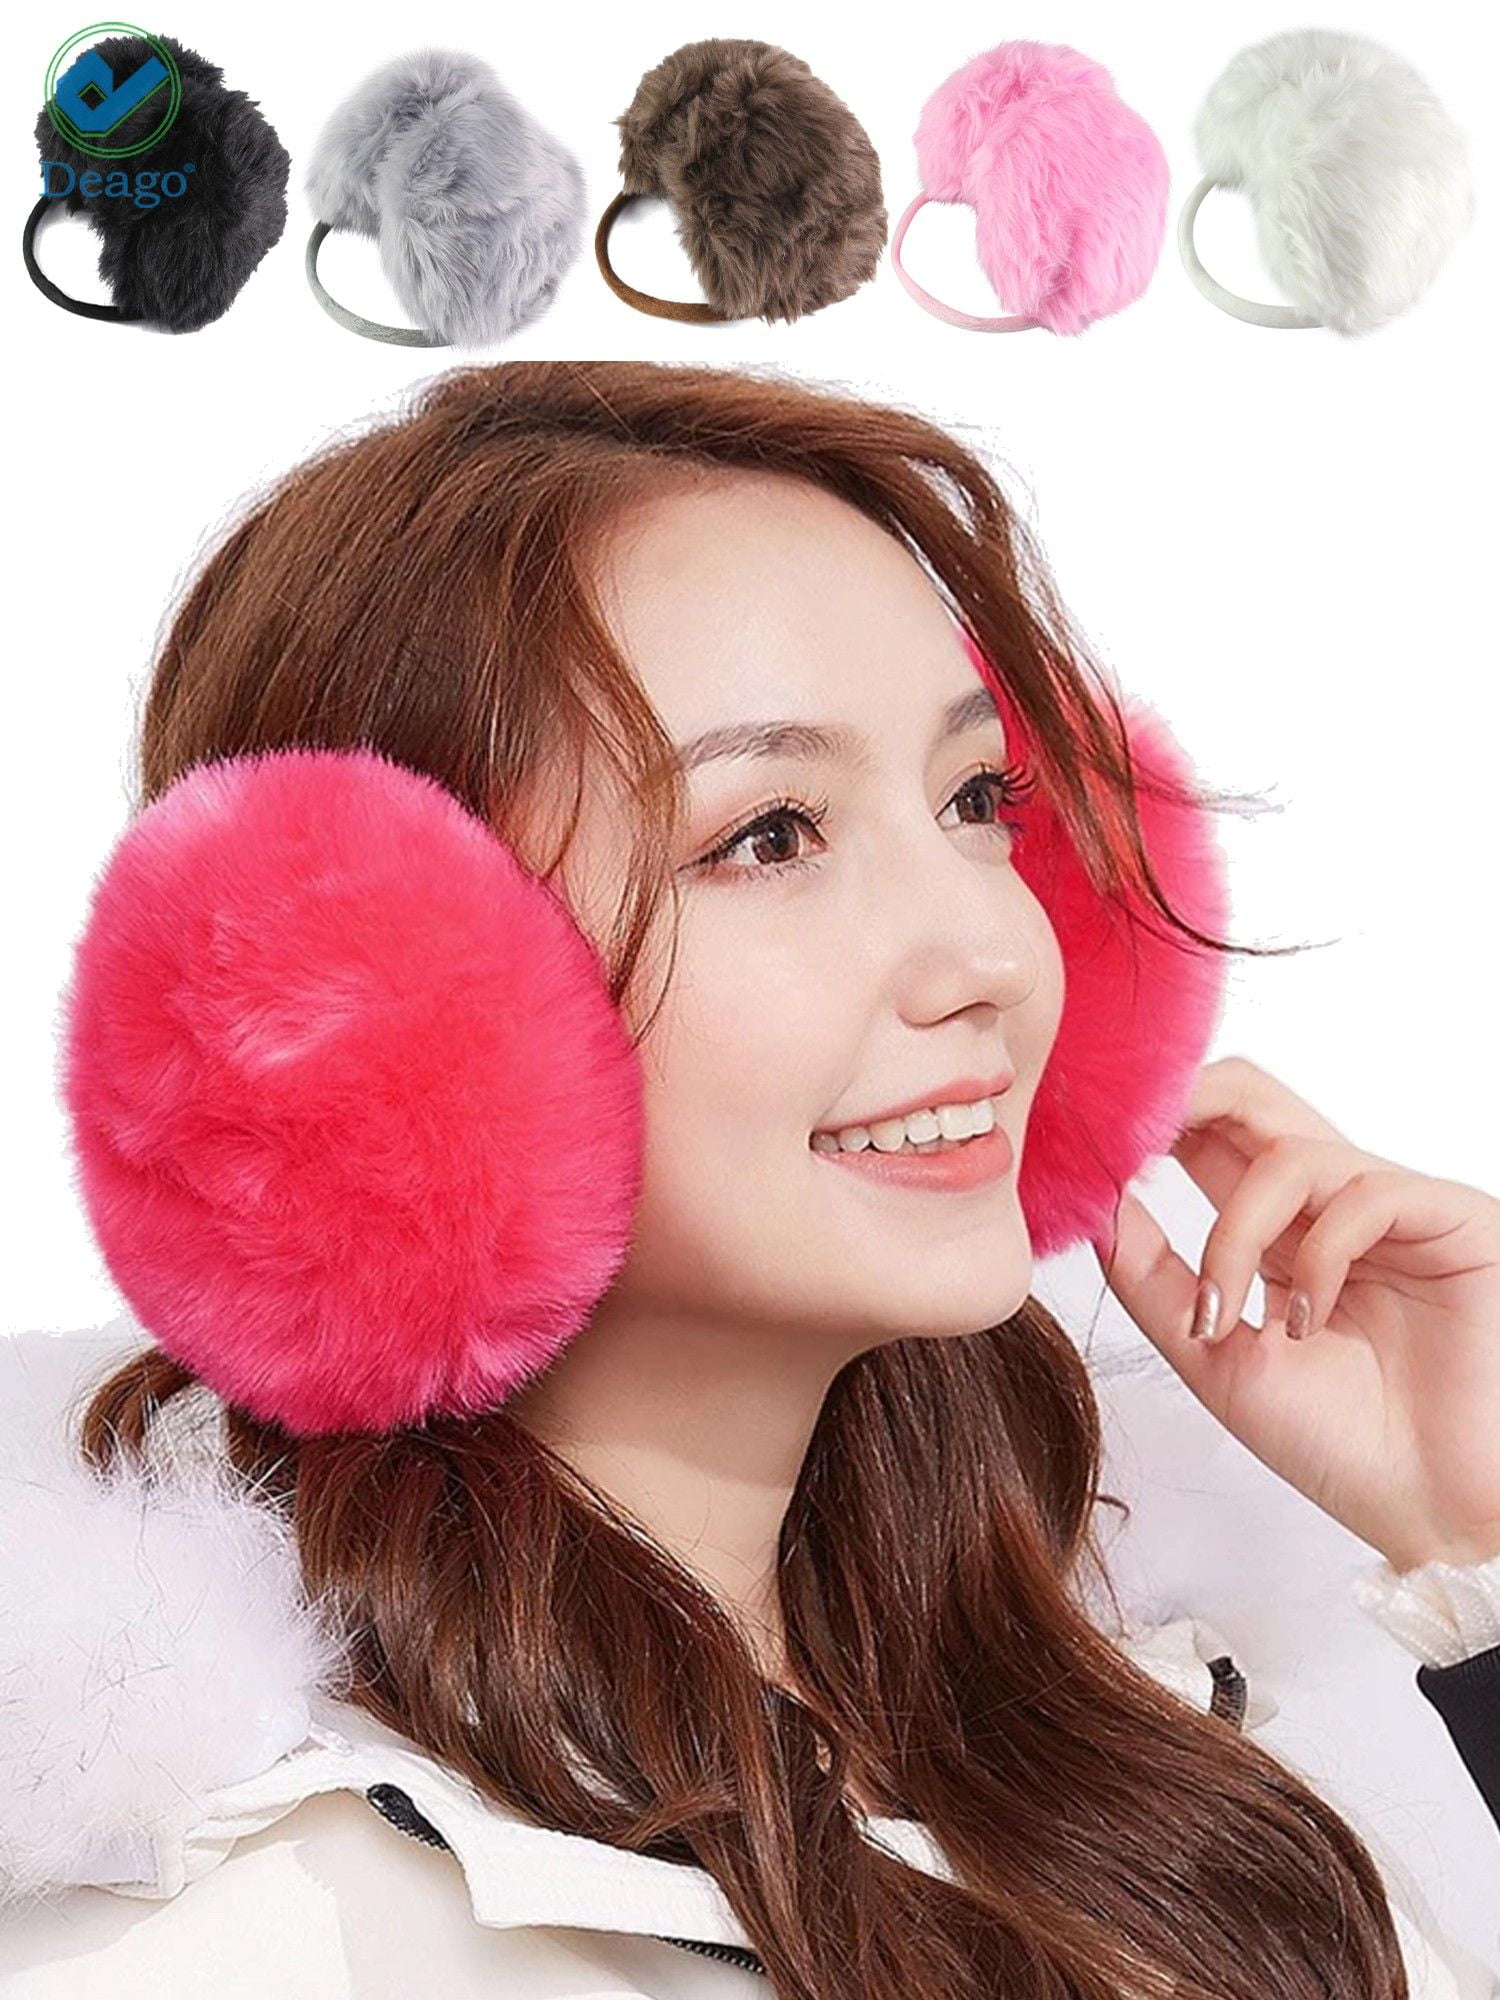 Celebrate Valentines Day Holiday Winter Earmuffs Ear Warmers Faux Fur Foldable Plush Outdoor Gift